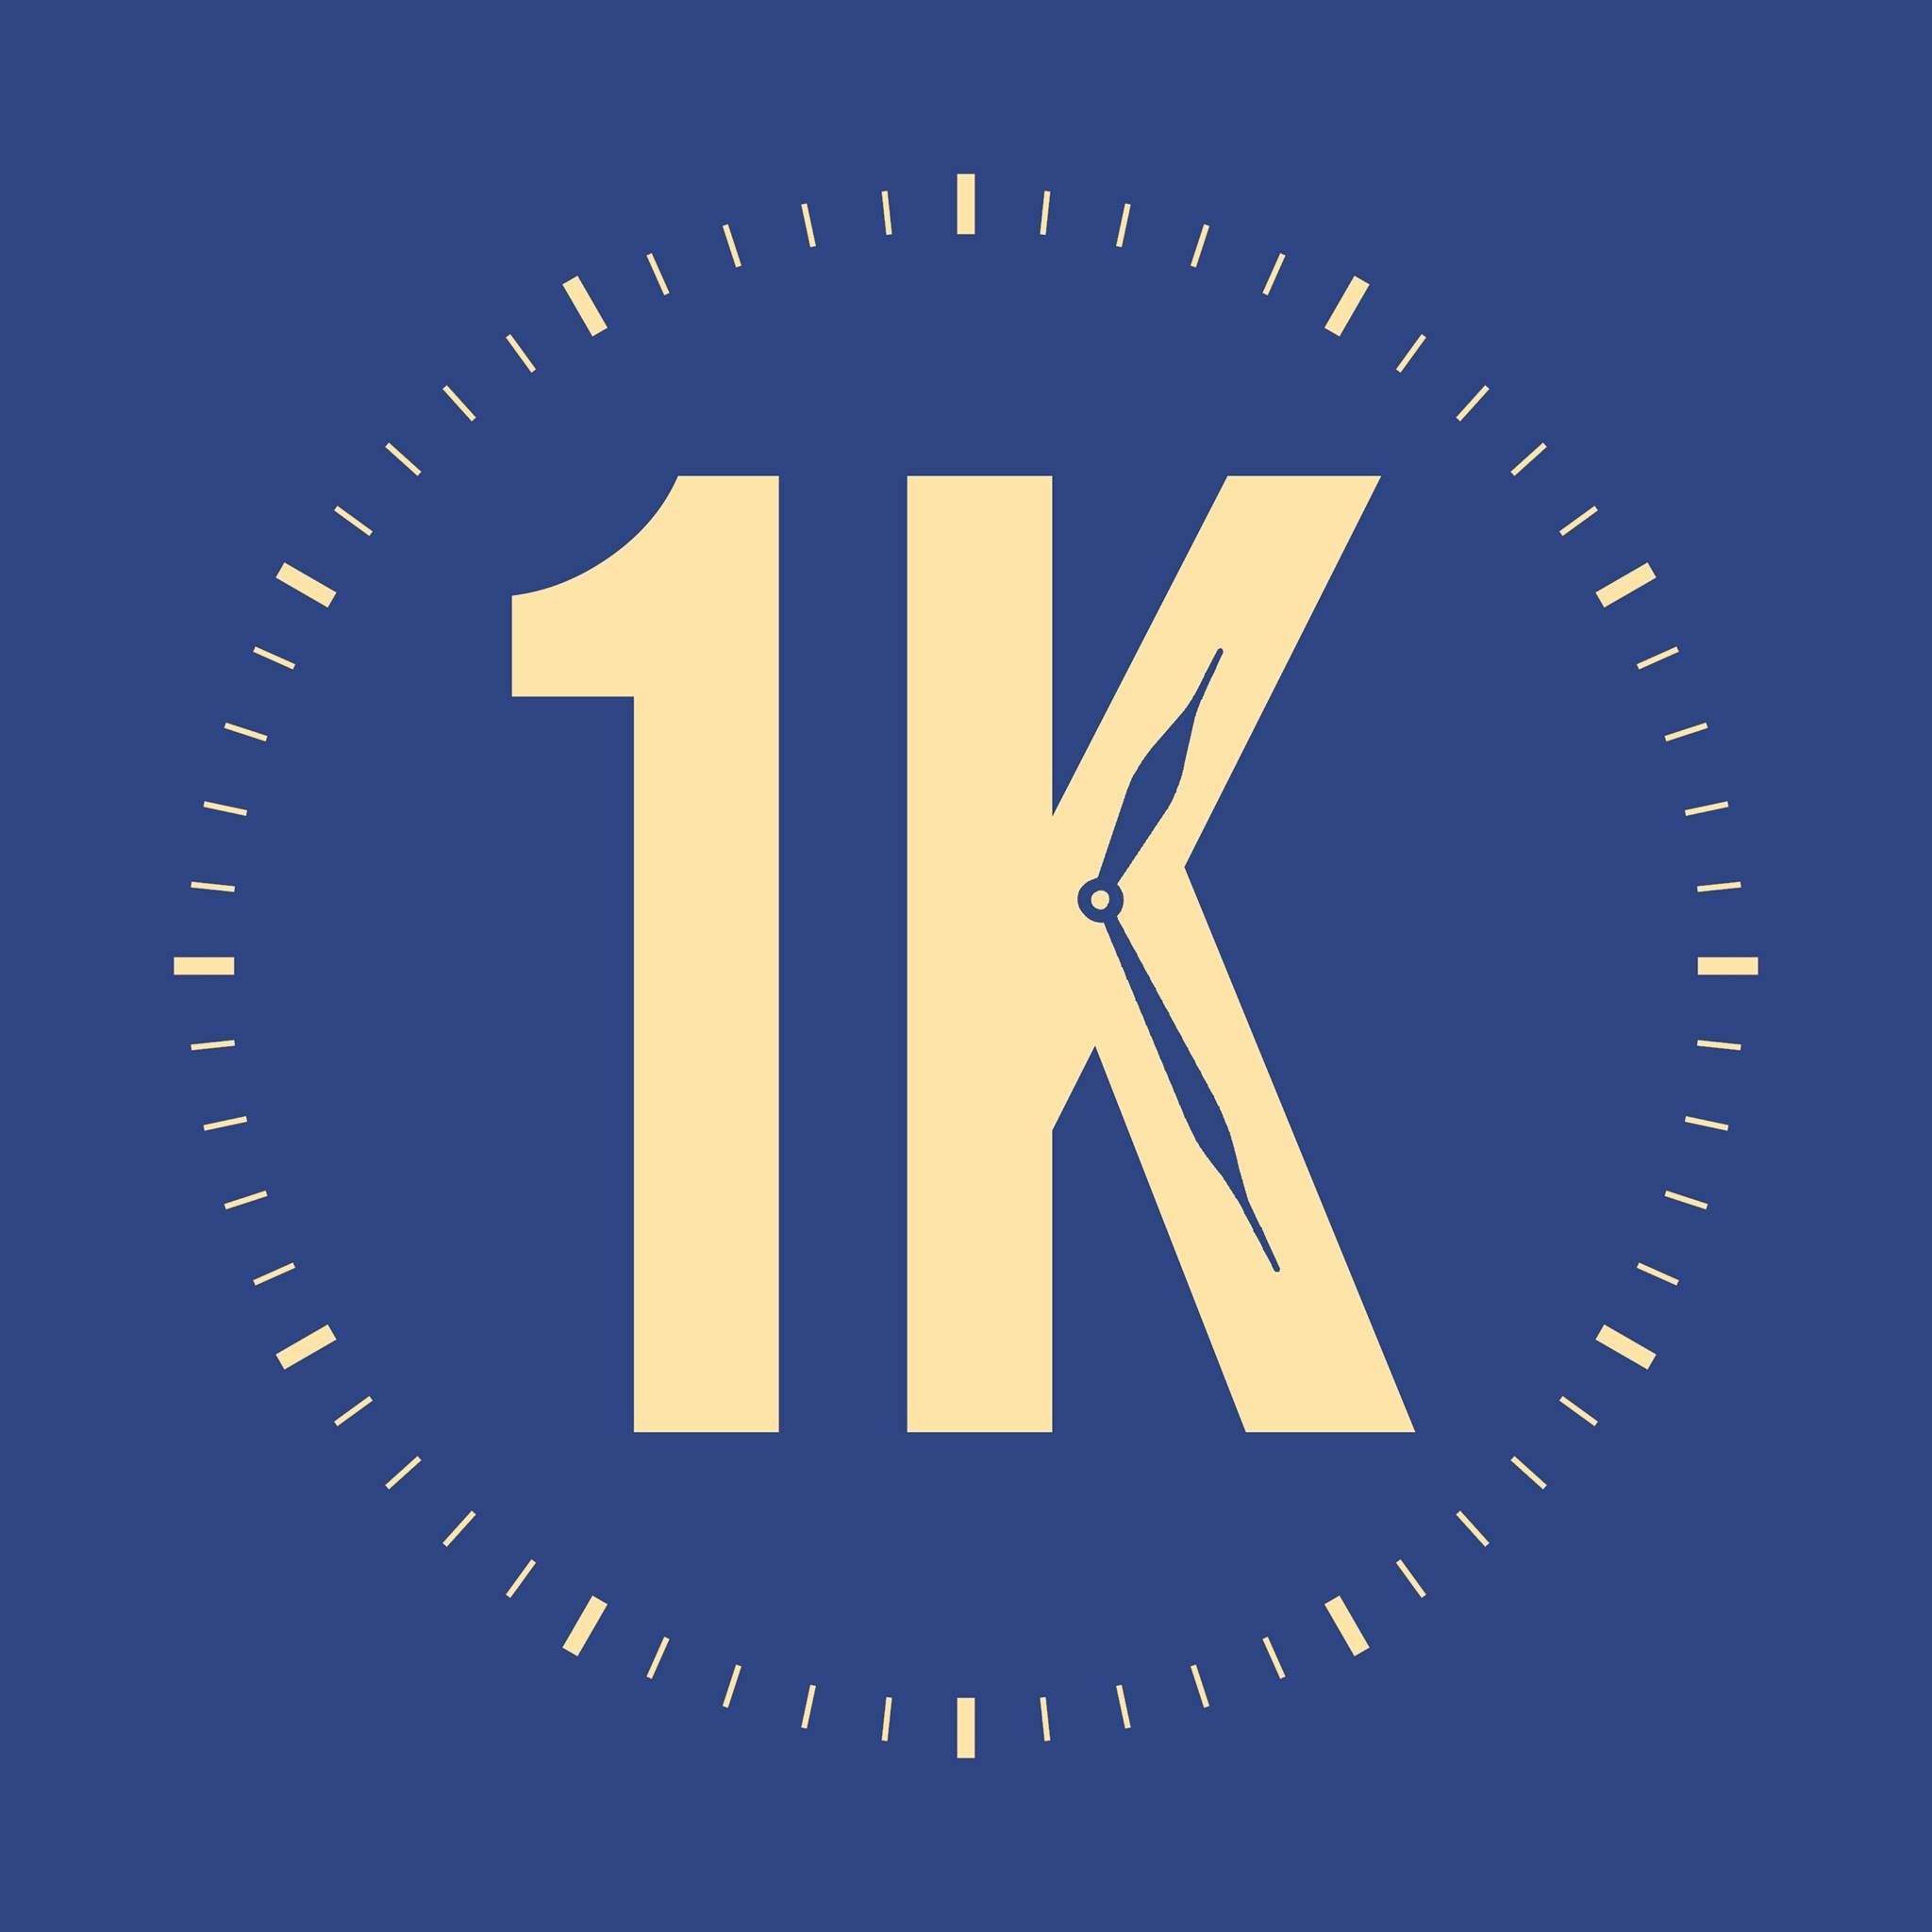 1K: The 1,000 Second Interview Podcast